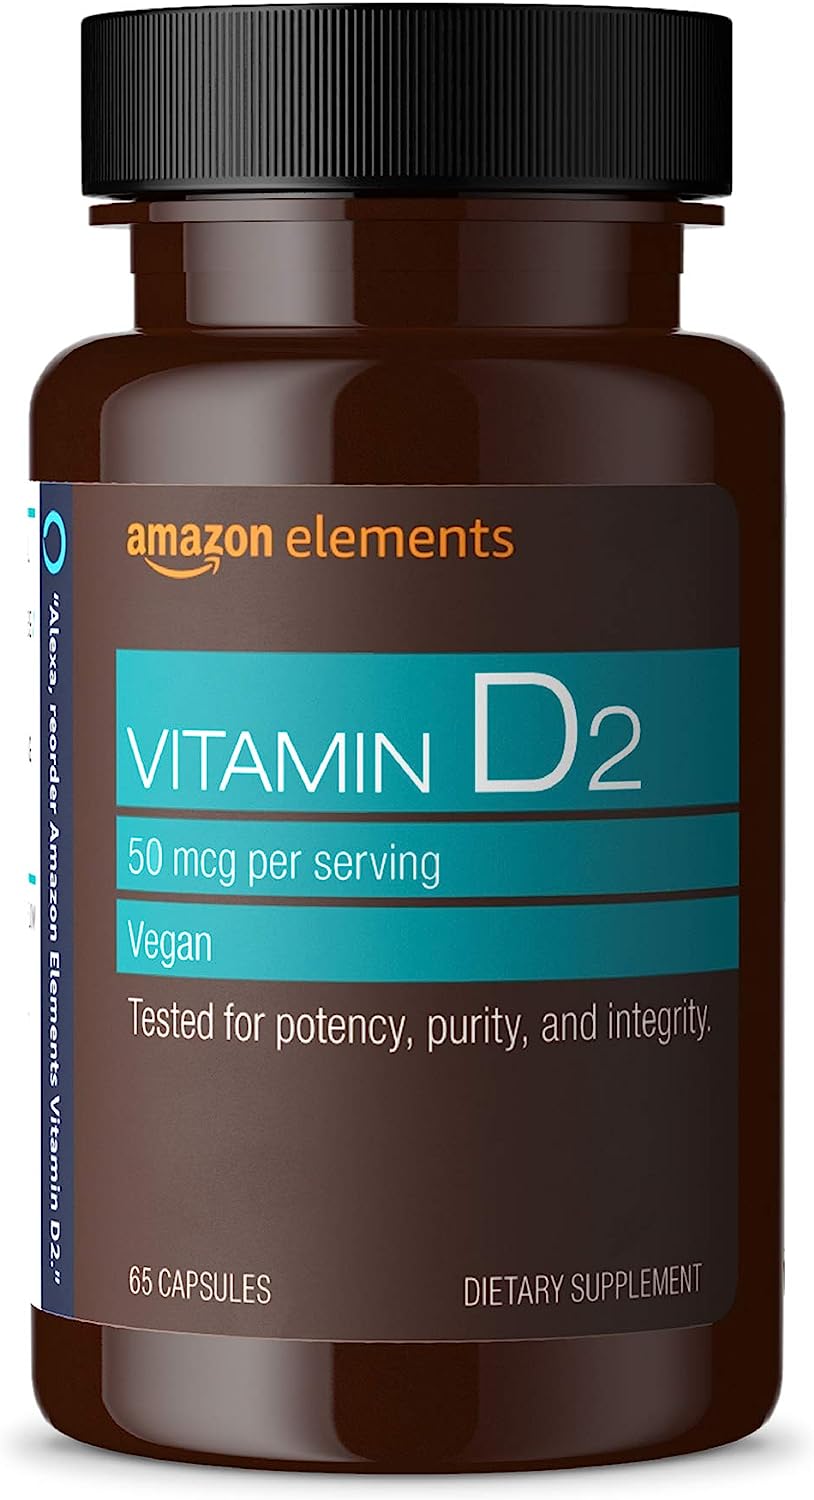 “Amazon Elements Vitamin D2 Supplement – Cultured Yeast Derived, Supports Strong Bones and Immune Health, Vegan and Gluten-Free”